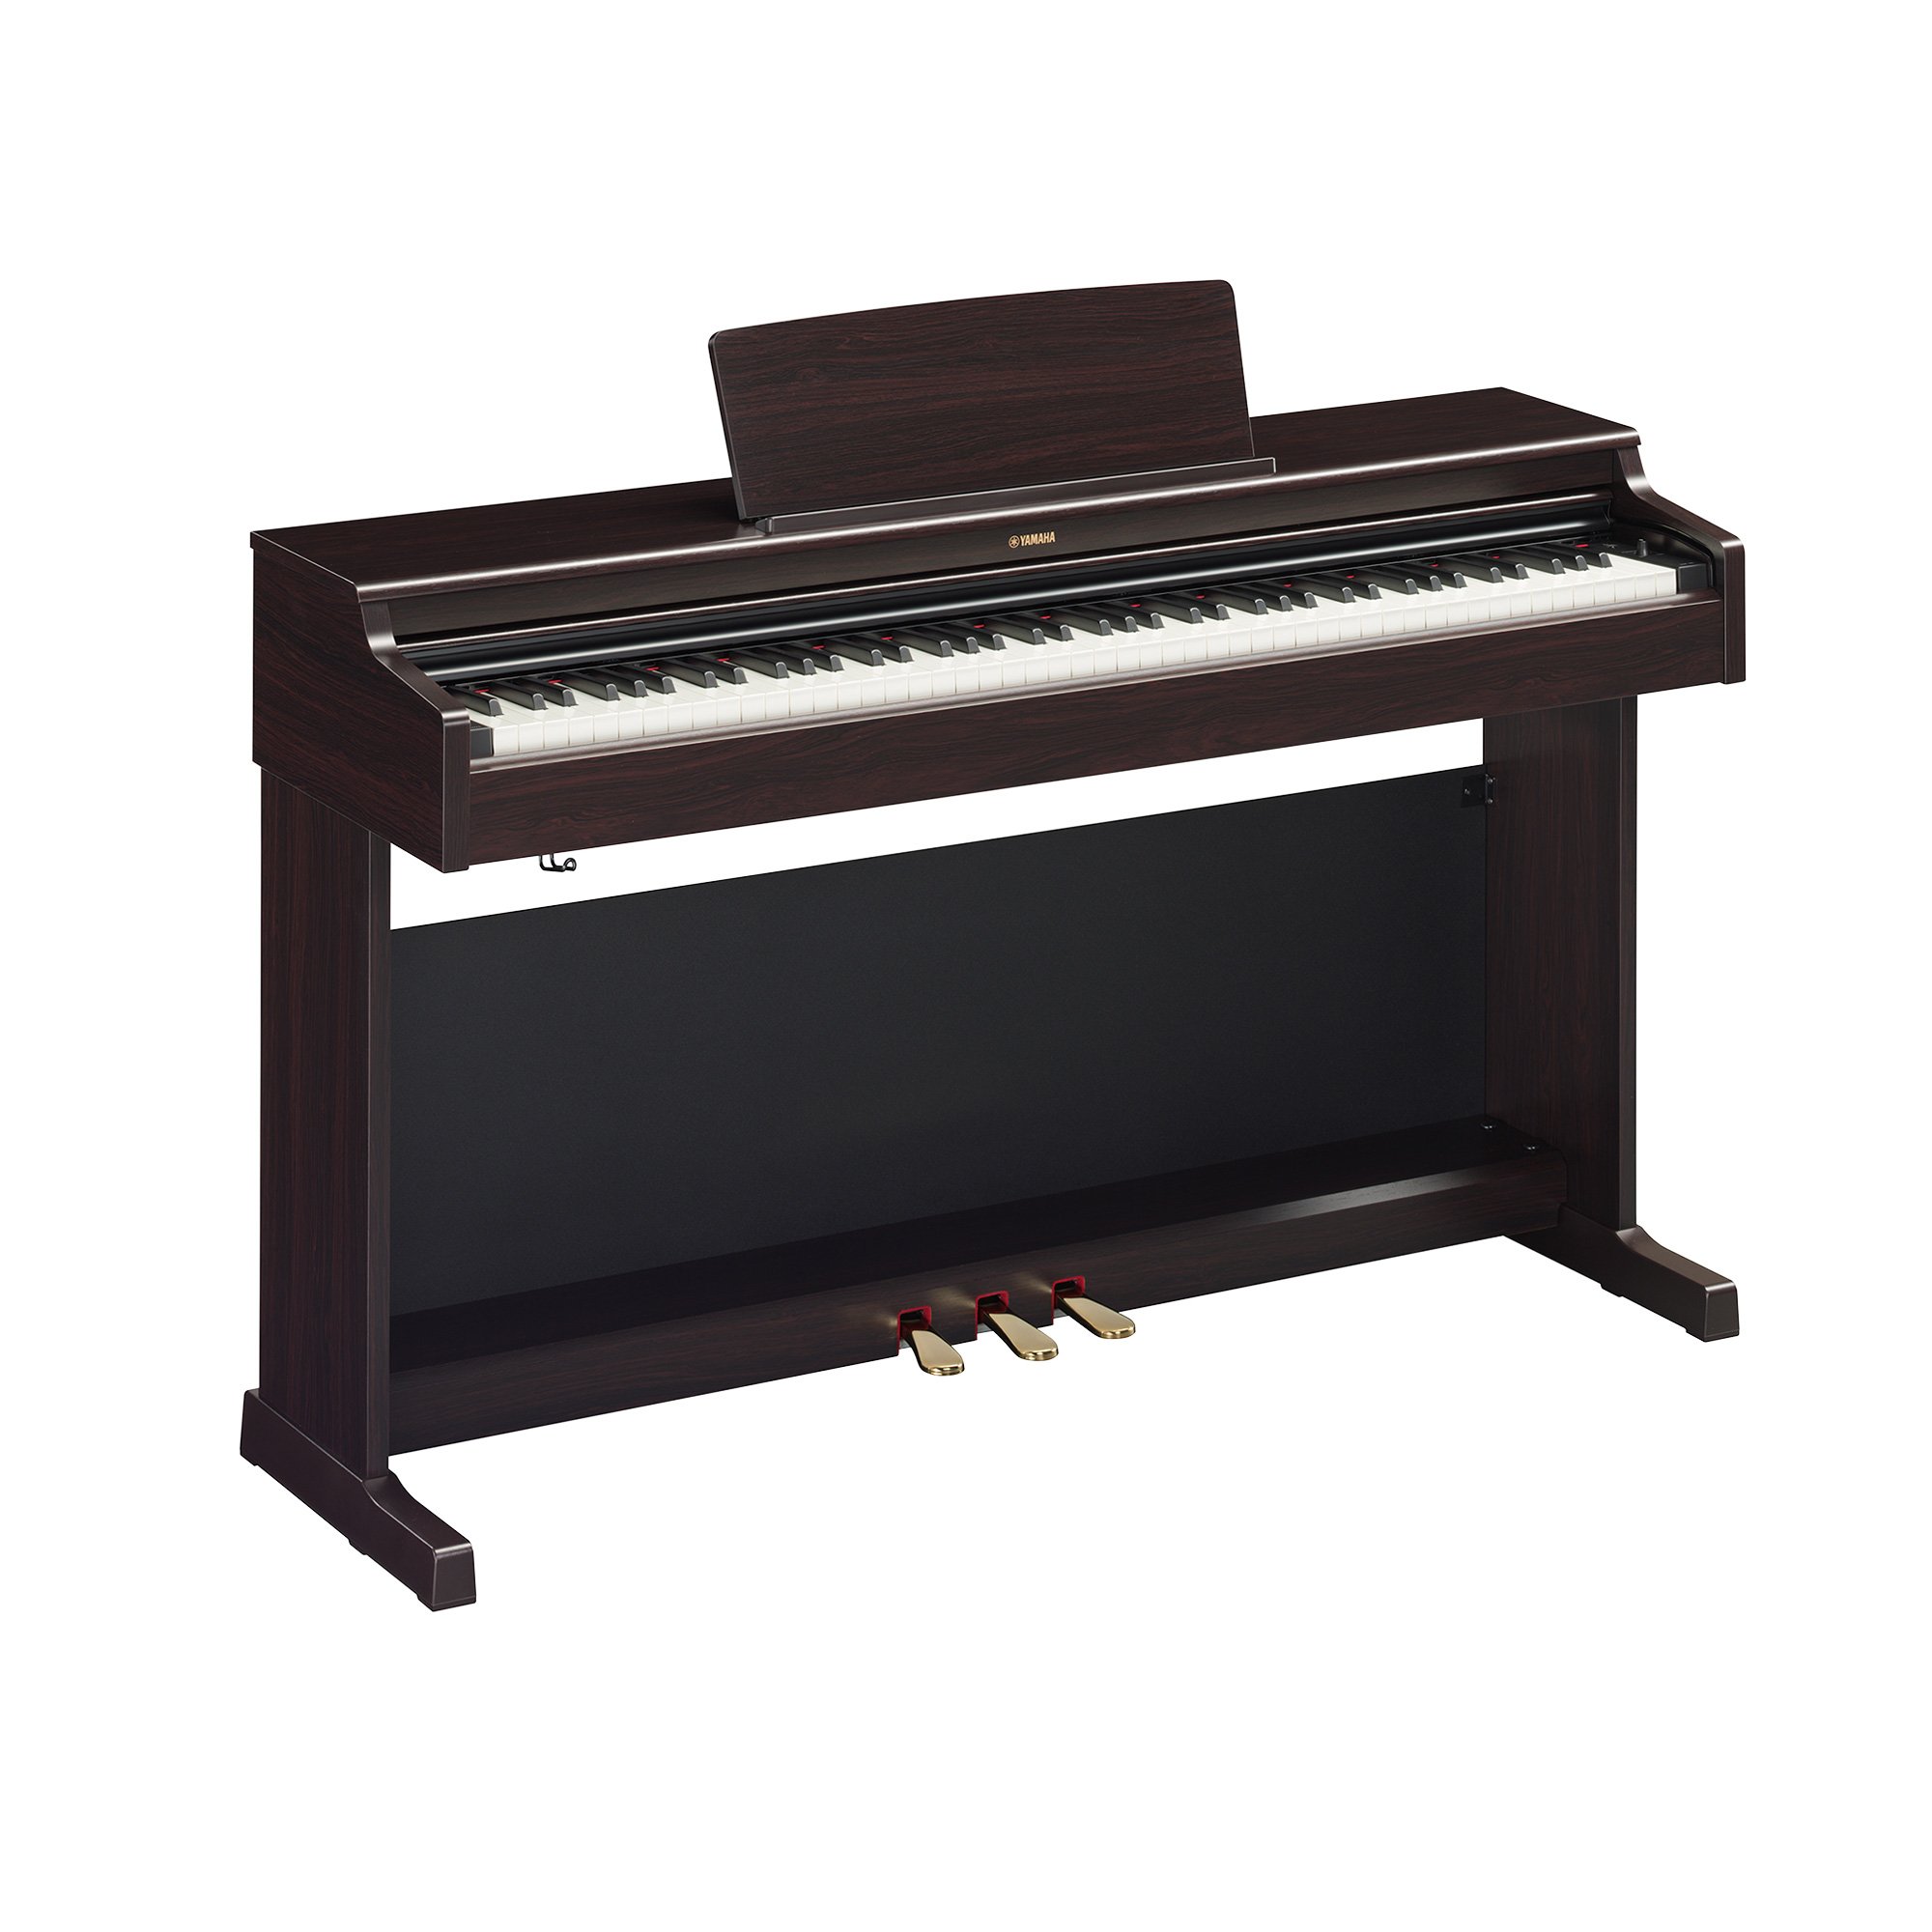 ARIUS - Pianos - Musical Instruments - Products - Yamaha - Canada 